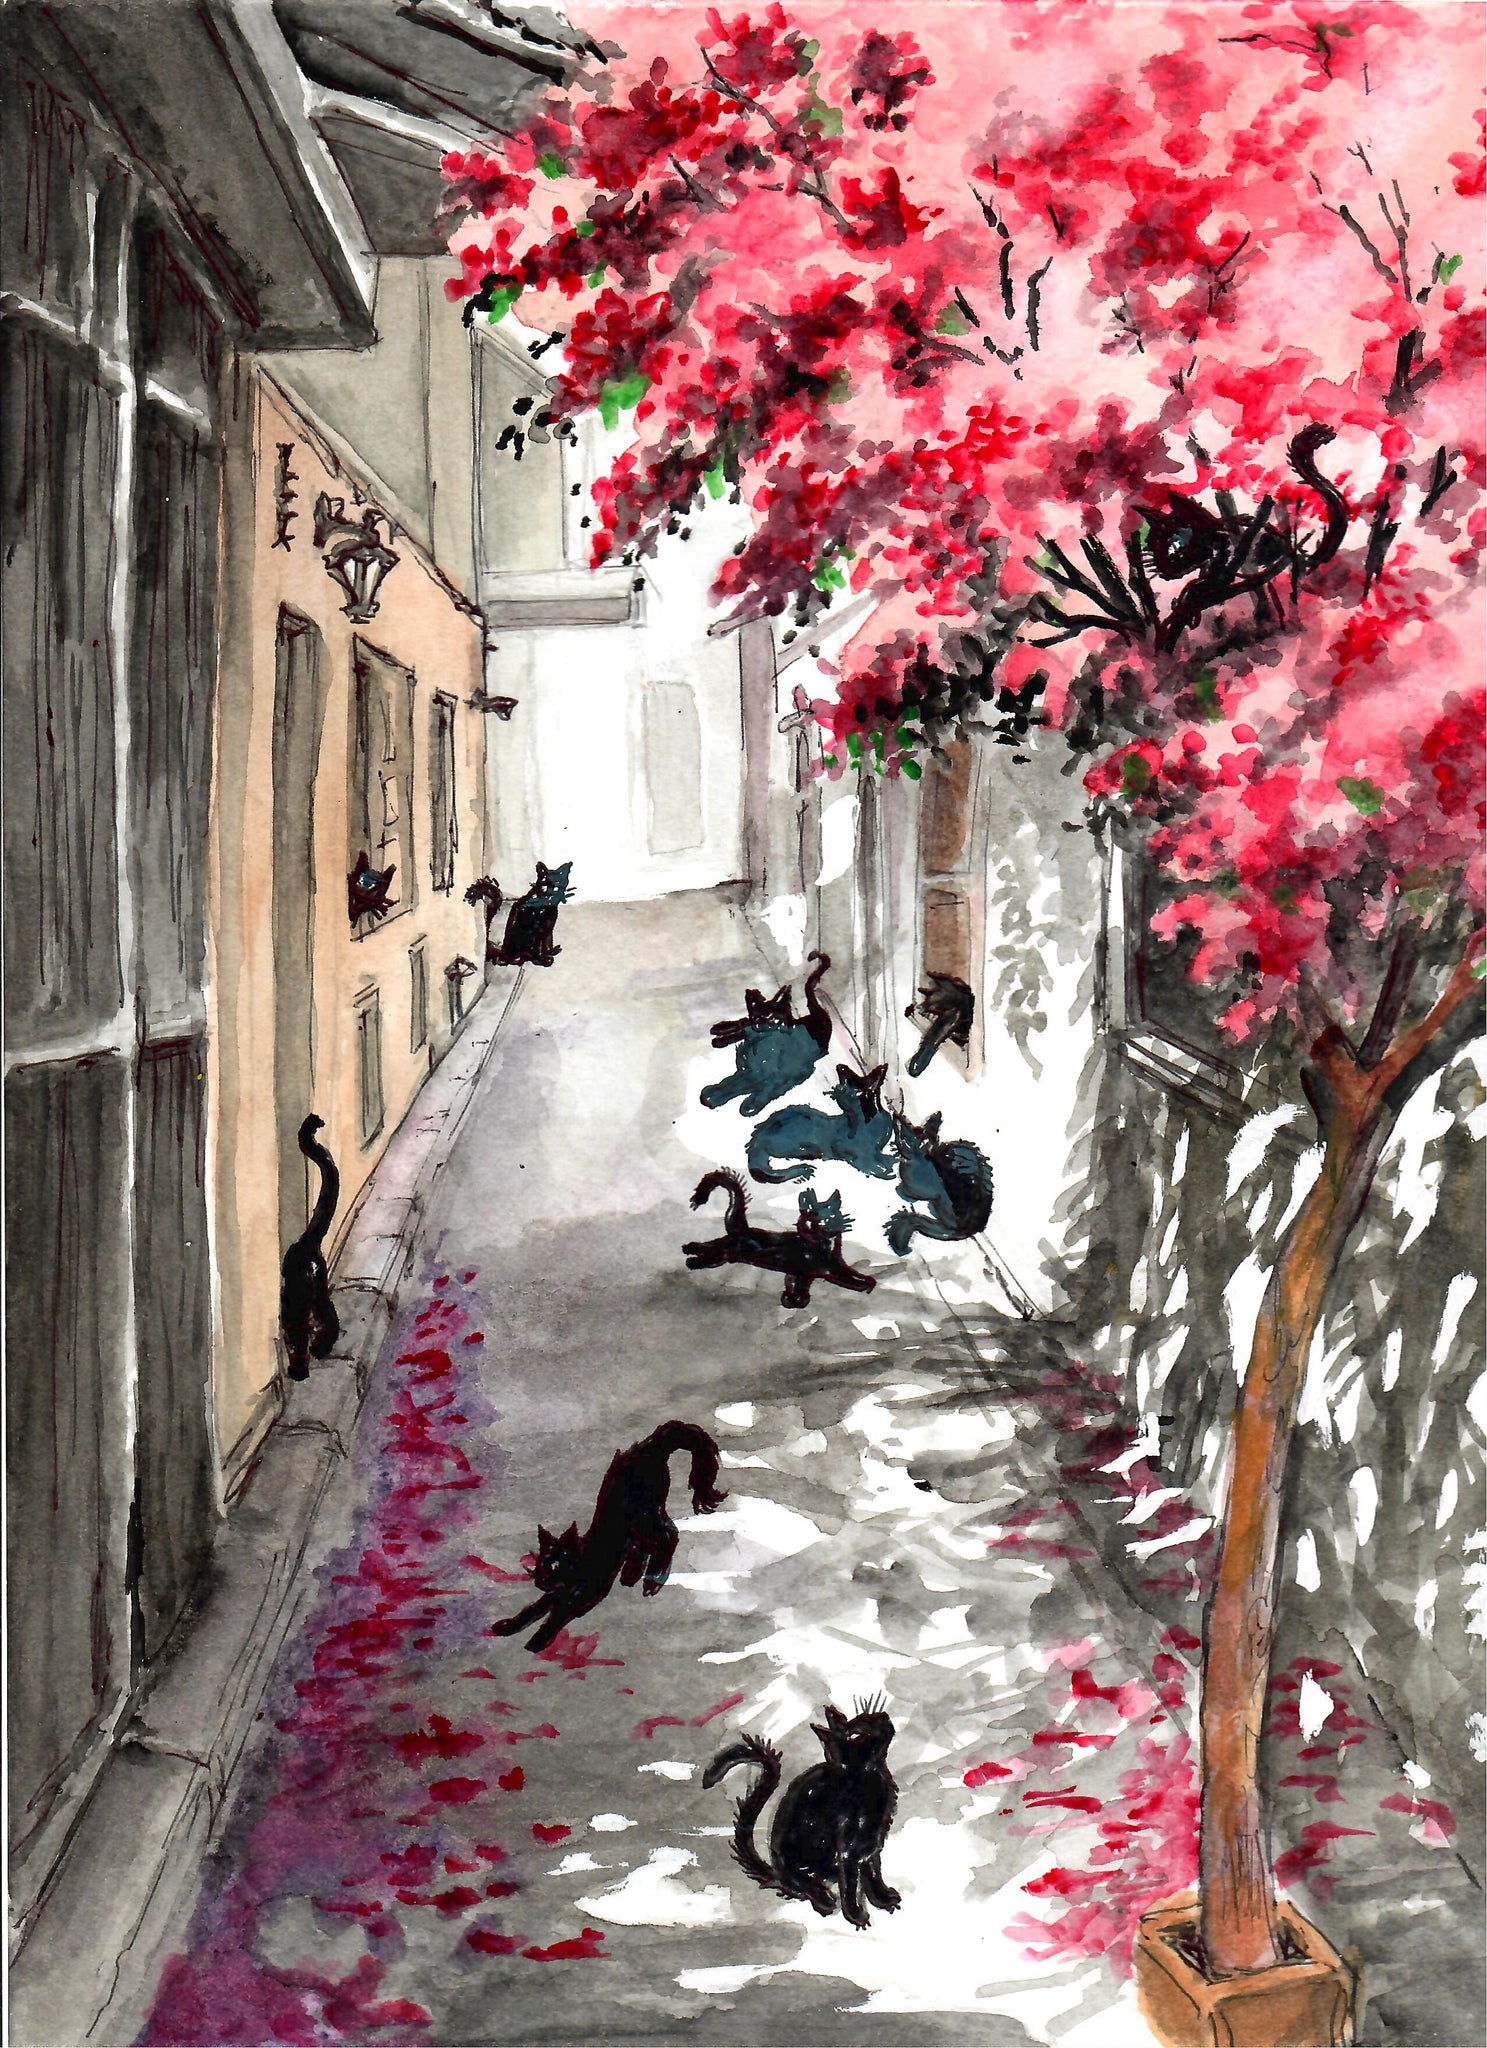 Cats In A Flowered Alley With A Large Pink Blossom Tree